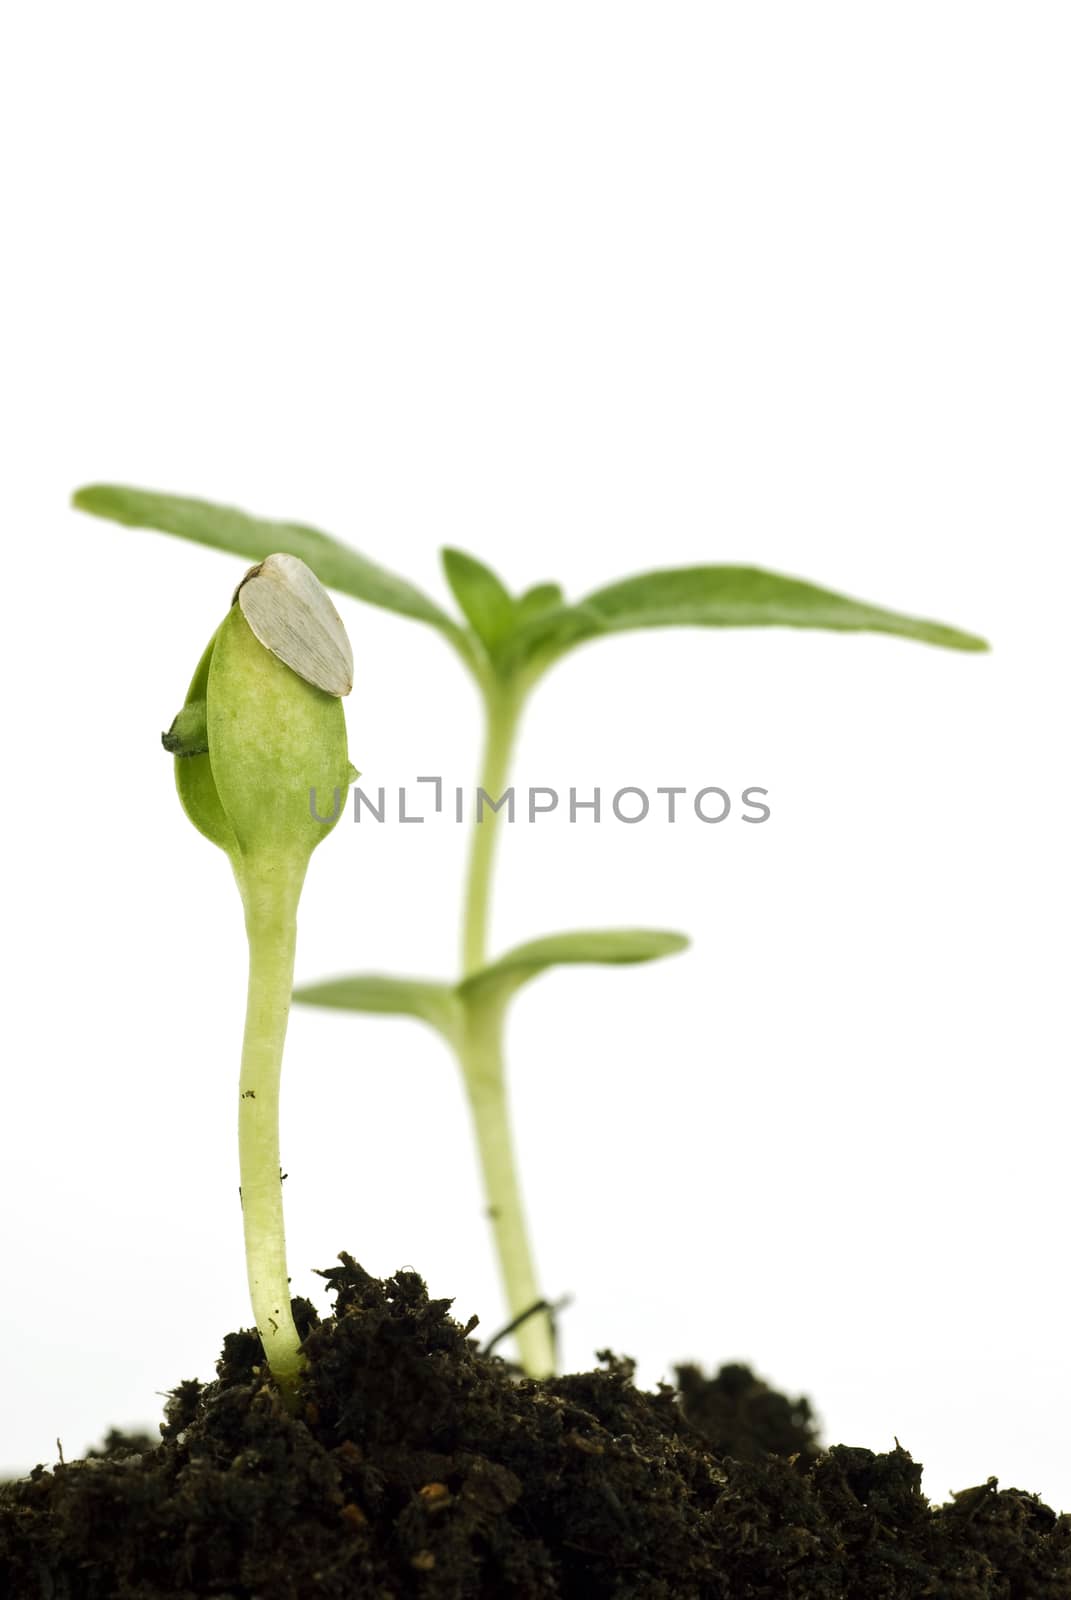 Green seedling showing concept of life.  Shot on white background